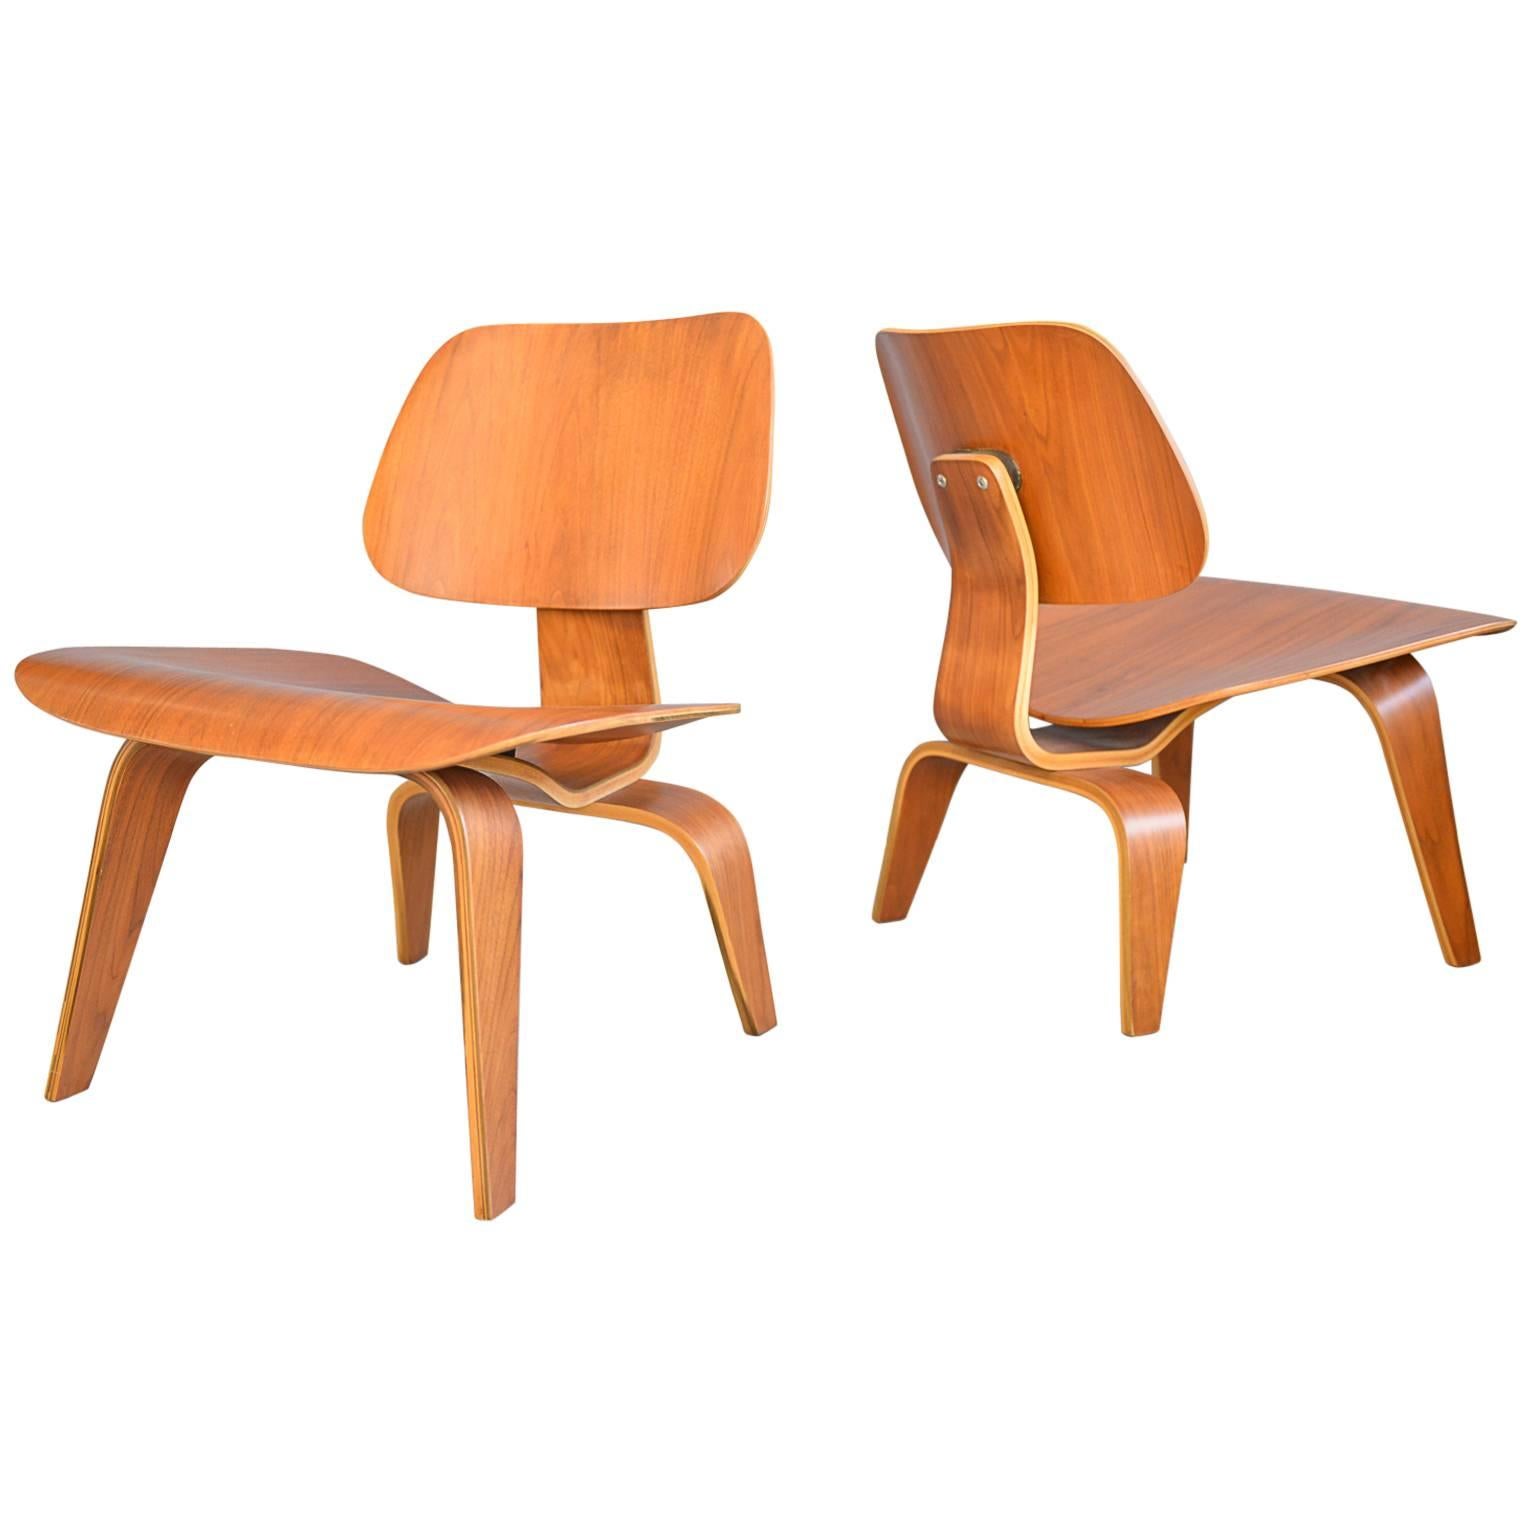 Matched Pair of Charles Eames LCW Lounge Chairs